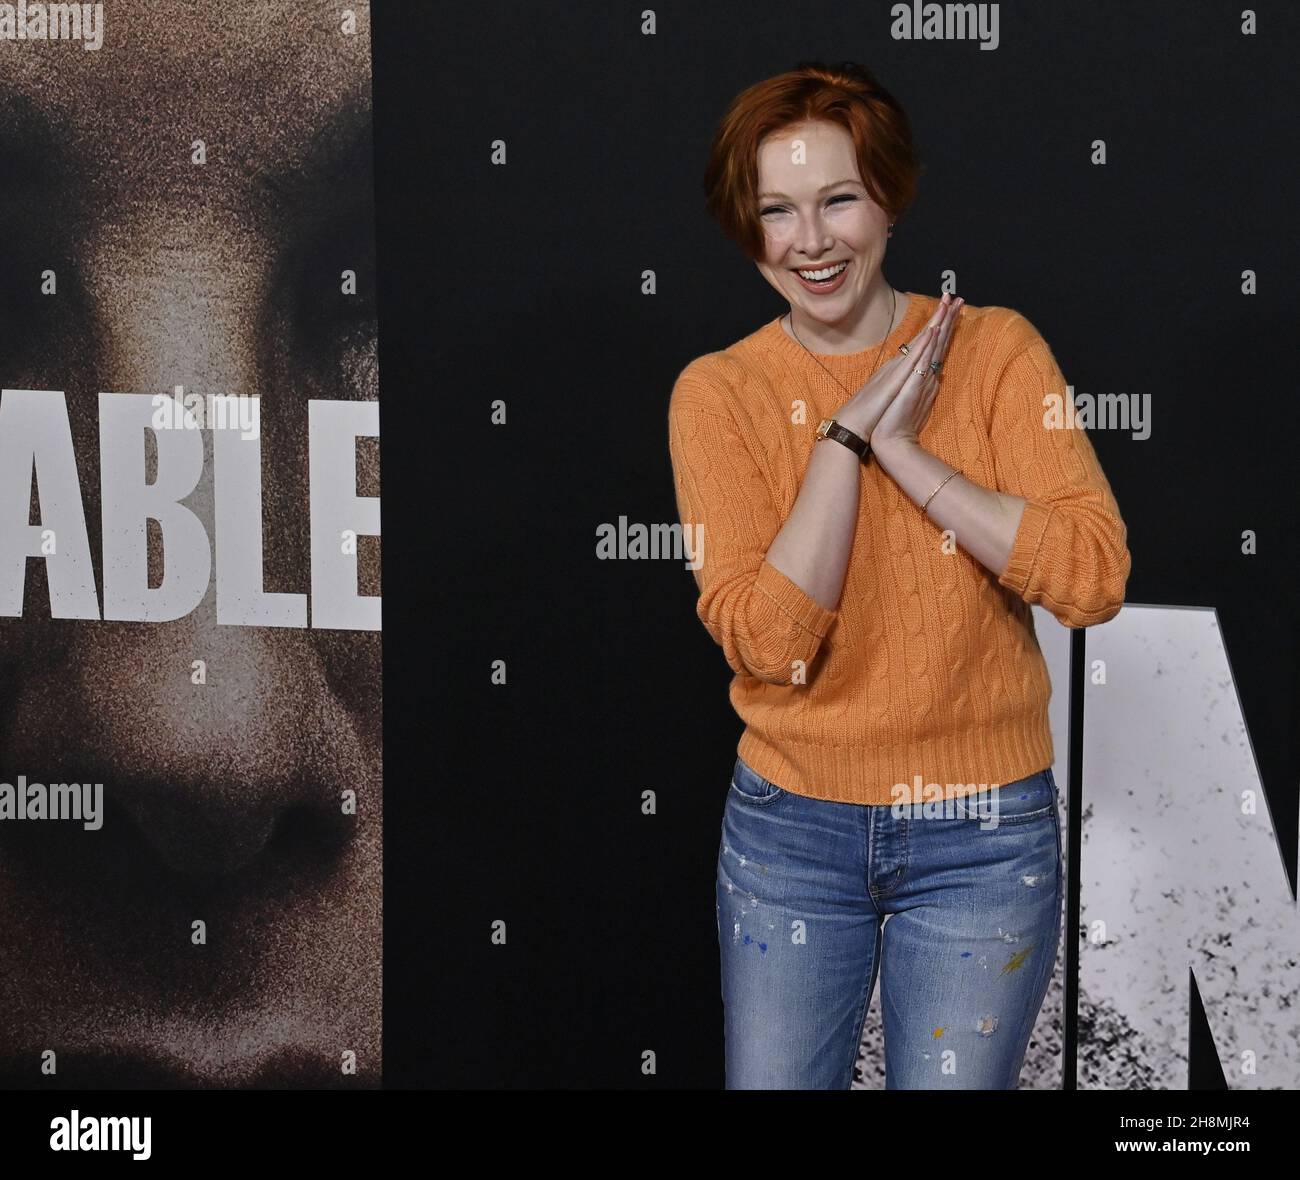 Los Angeles, United States. 01st Dec, 2021. Actress Molly C. Quinn attends the premiere of Netfix's movie drama 'The Unforgivable' at the DGA Theater in Los Angeles on Tuesday, November 30, 2021. Storyline: Released from prison after serving a sentence for a violent crime, Ruth Slater (Bullock) re-enters a society that refuses to forgive her past. Facing severe judgment from the place she once called home, her only hope for redemption is finding the estranged younger sister she was forced to leave behind. Photo by Jim Ruymen/UPI Credit: UPI/Alamy Live News Stock Photo